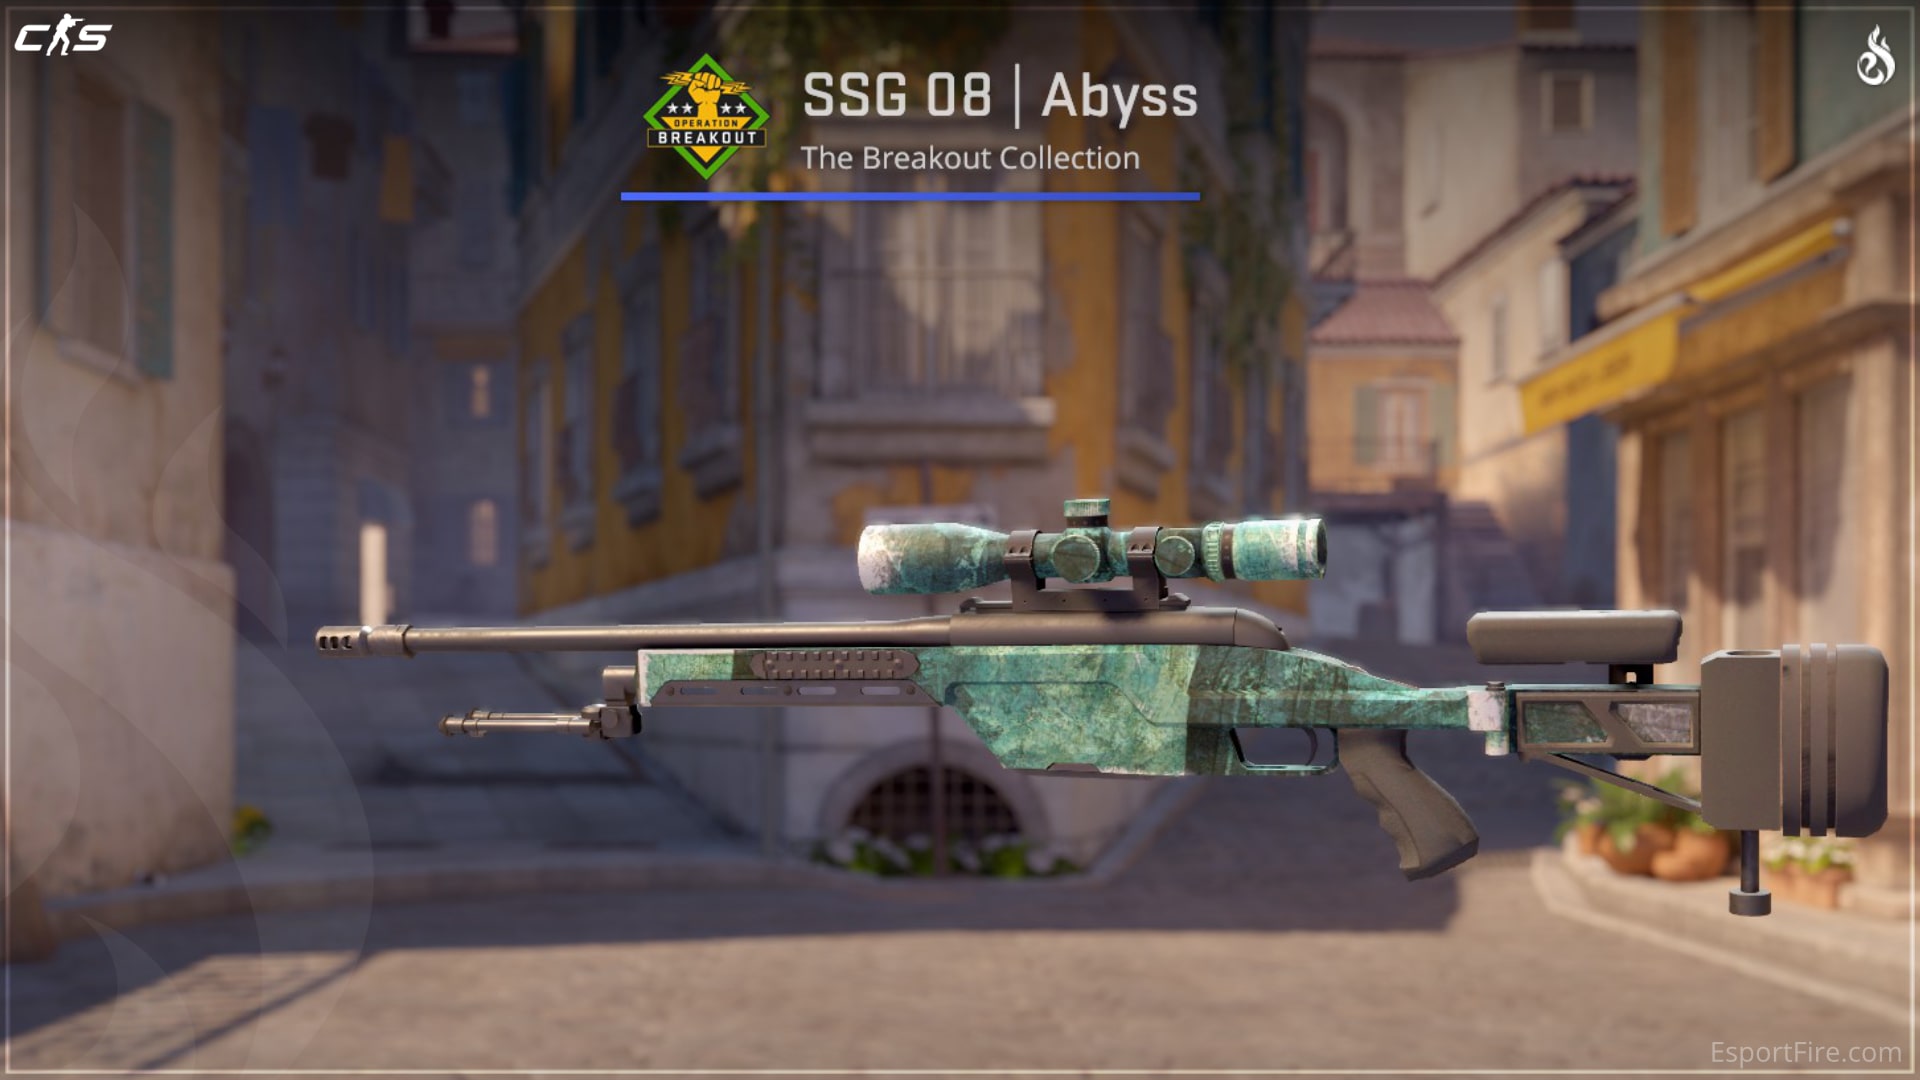 Best Battle Scarred Skins - Abyss